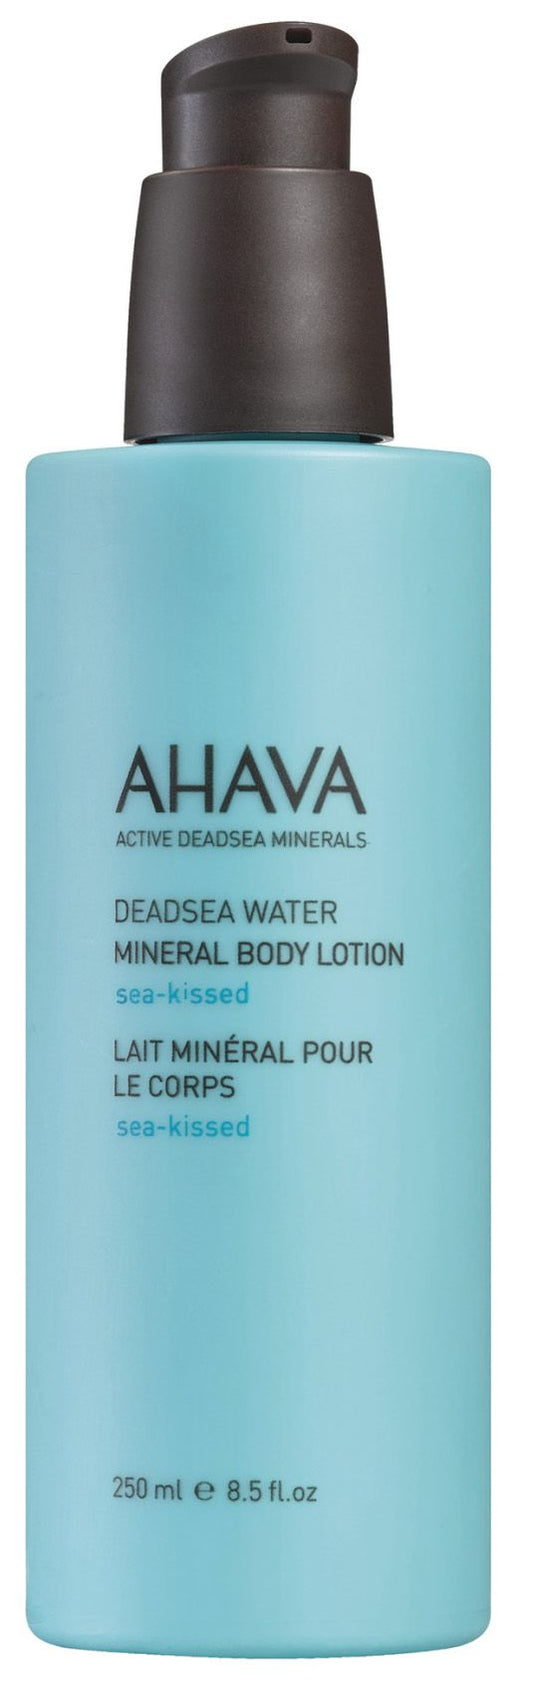 Mineral Body Lotion - SEA-KISSED